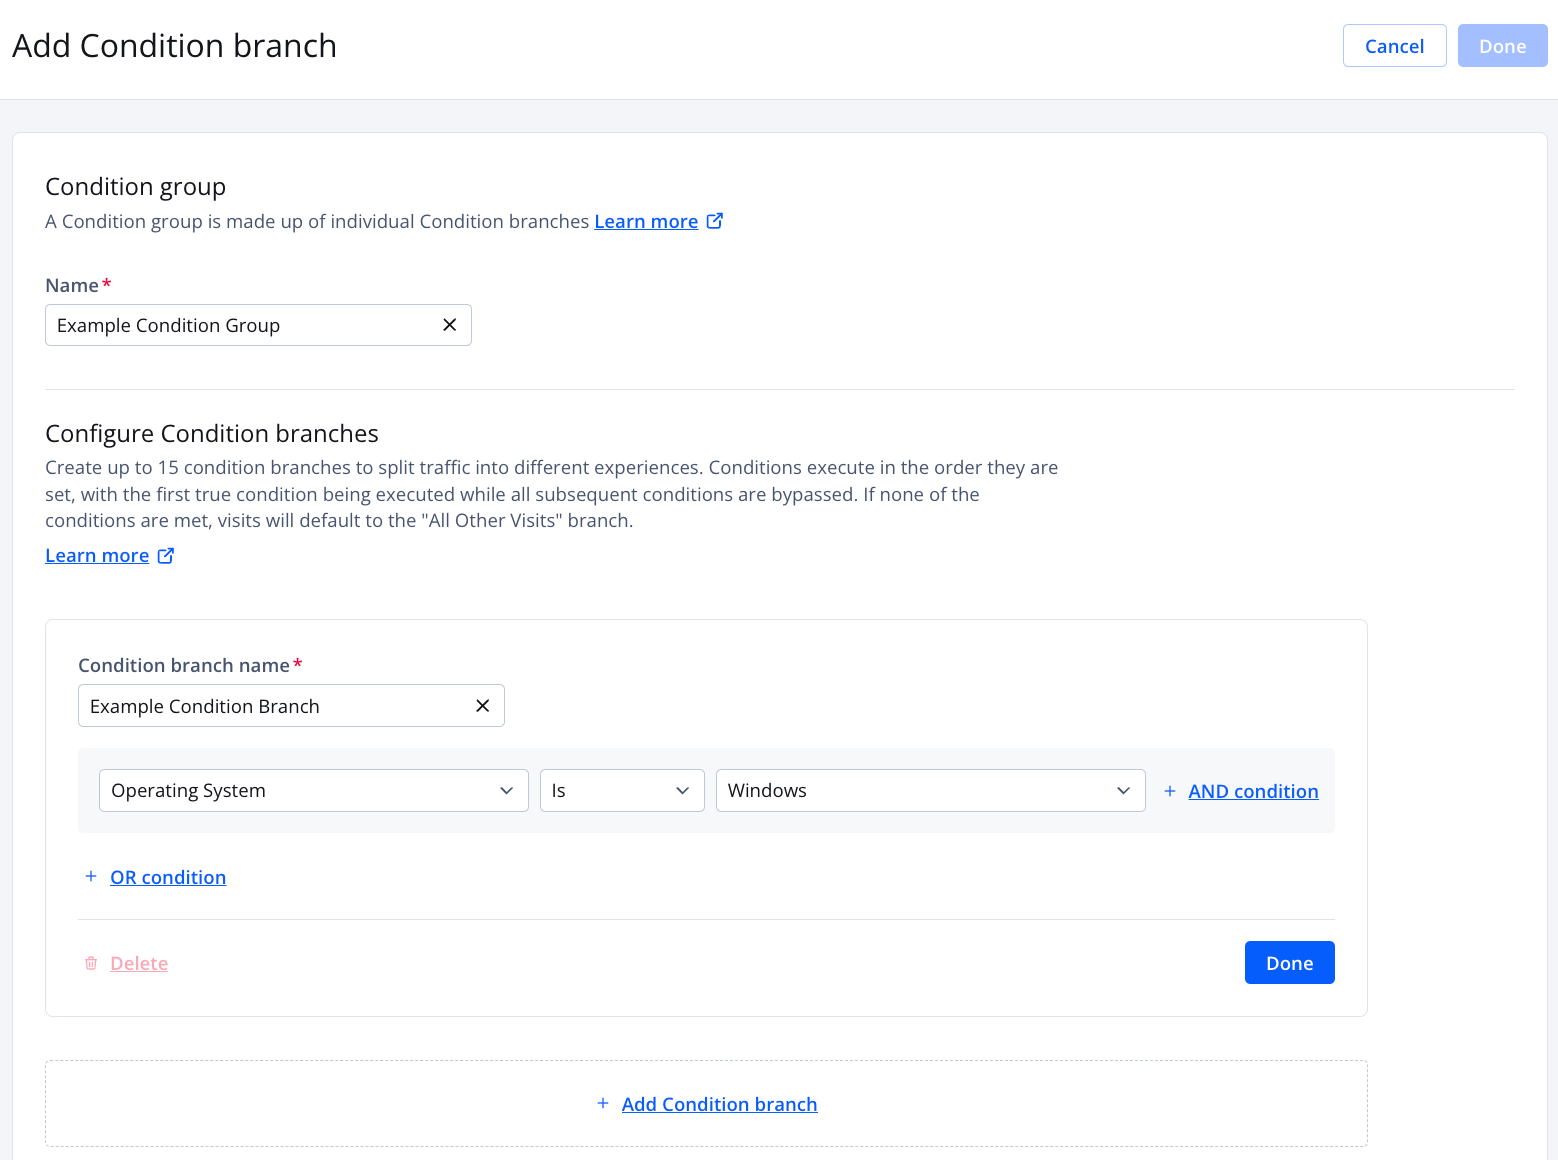 Add Condition branch page